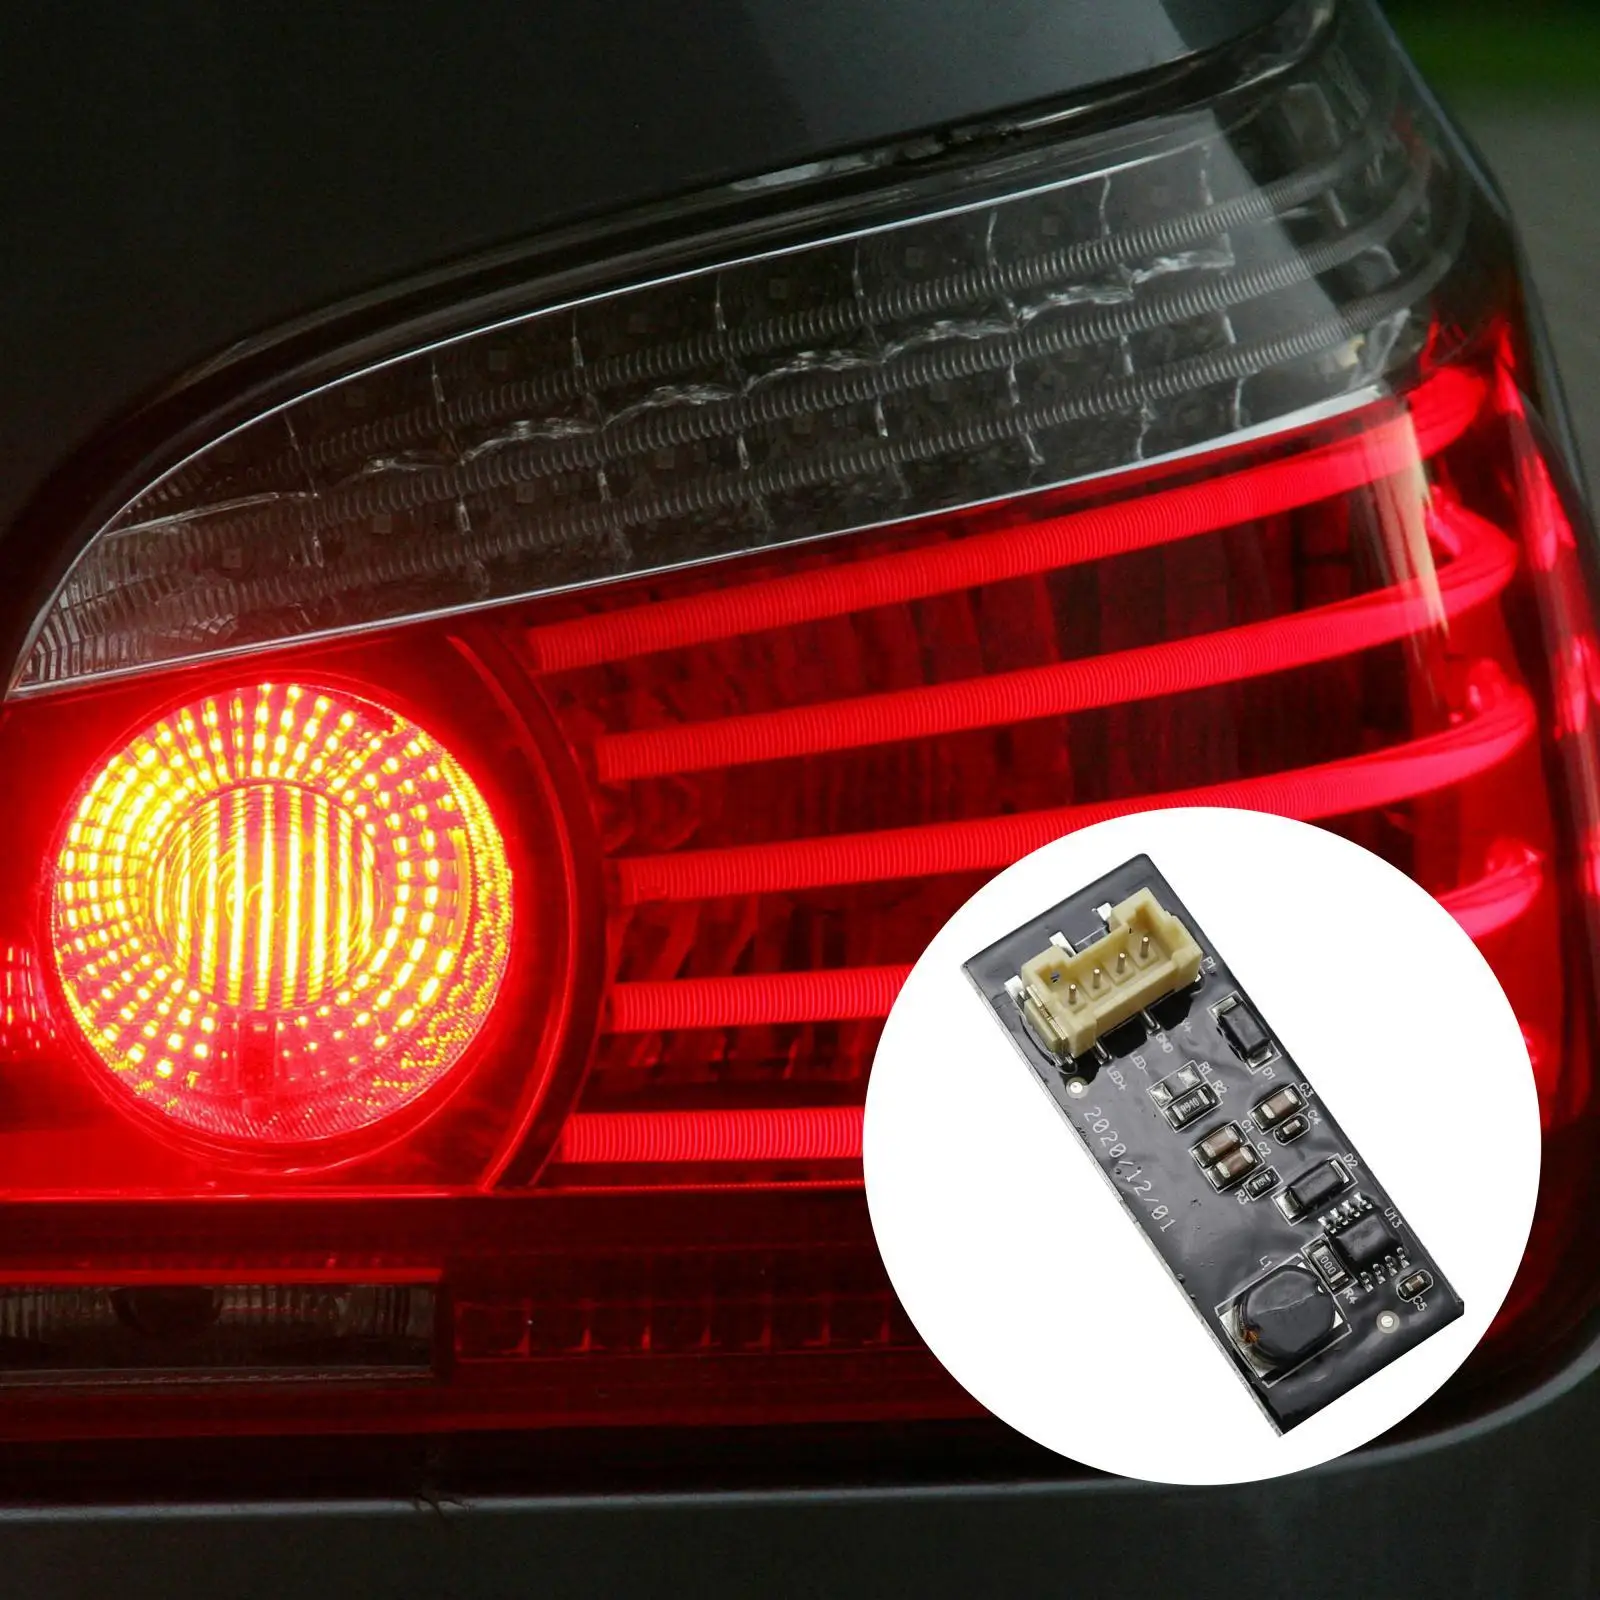 1x LED Tail Light Driver Chip Board for  X3 F25 2011-2017 B003809.2